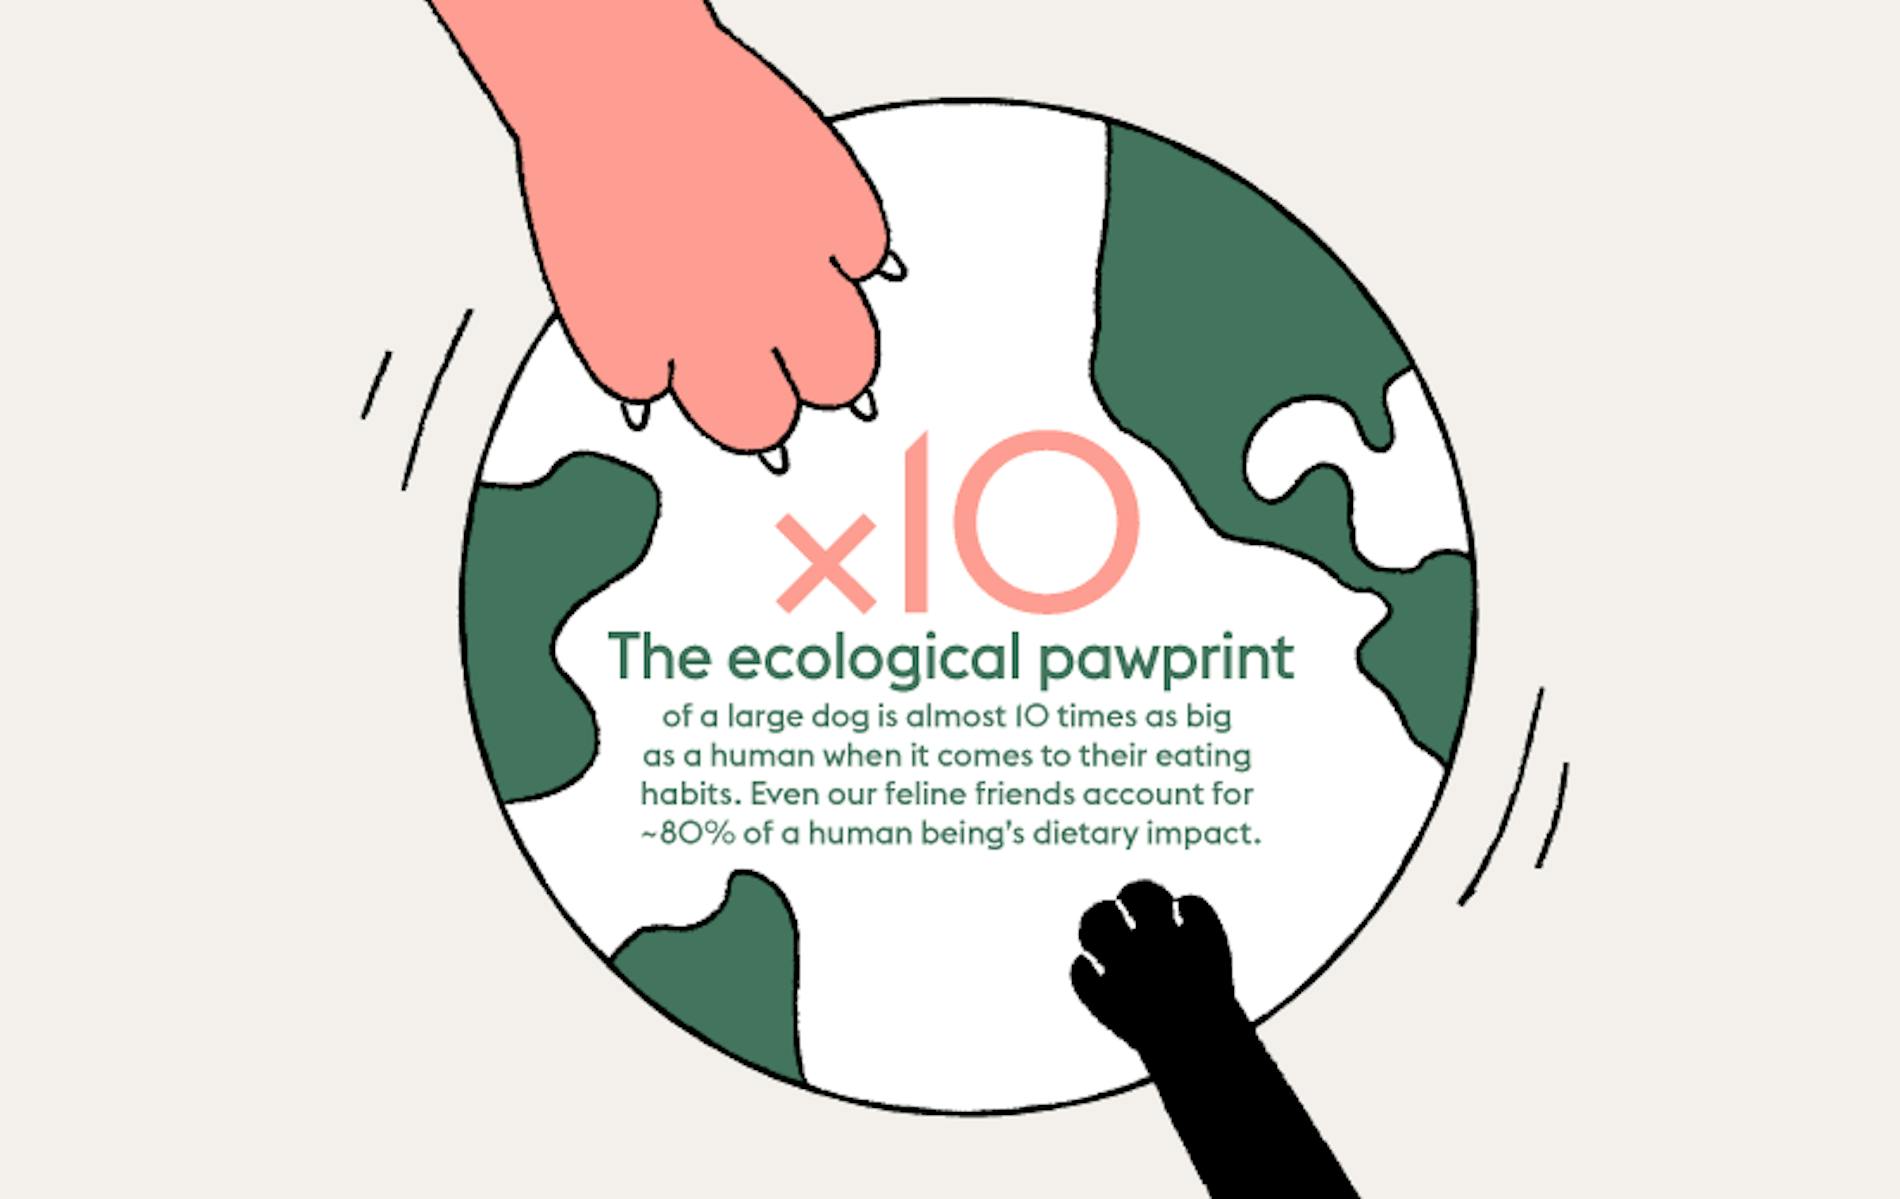 Ecological pawprint